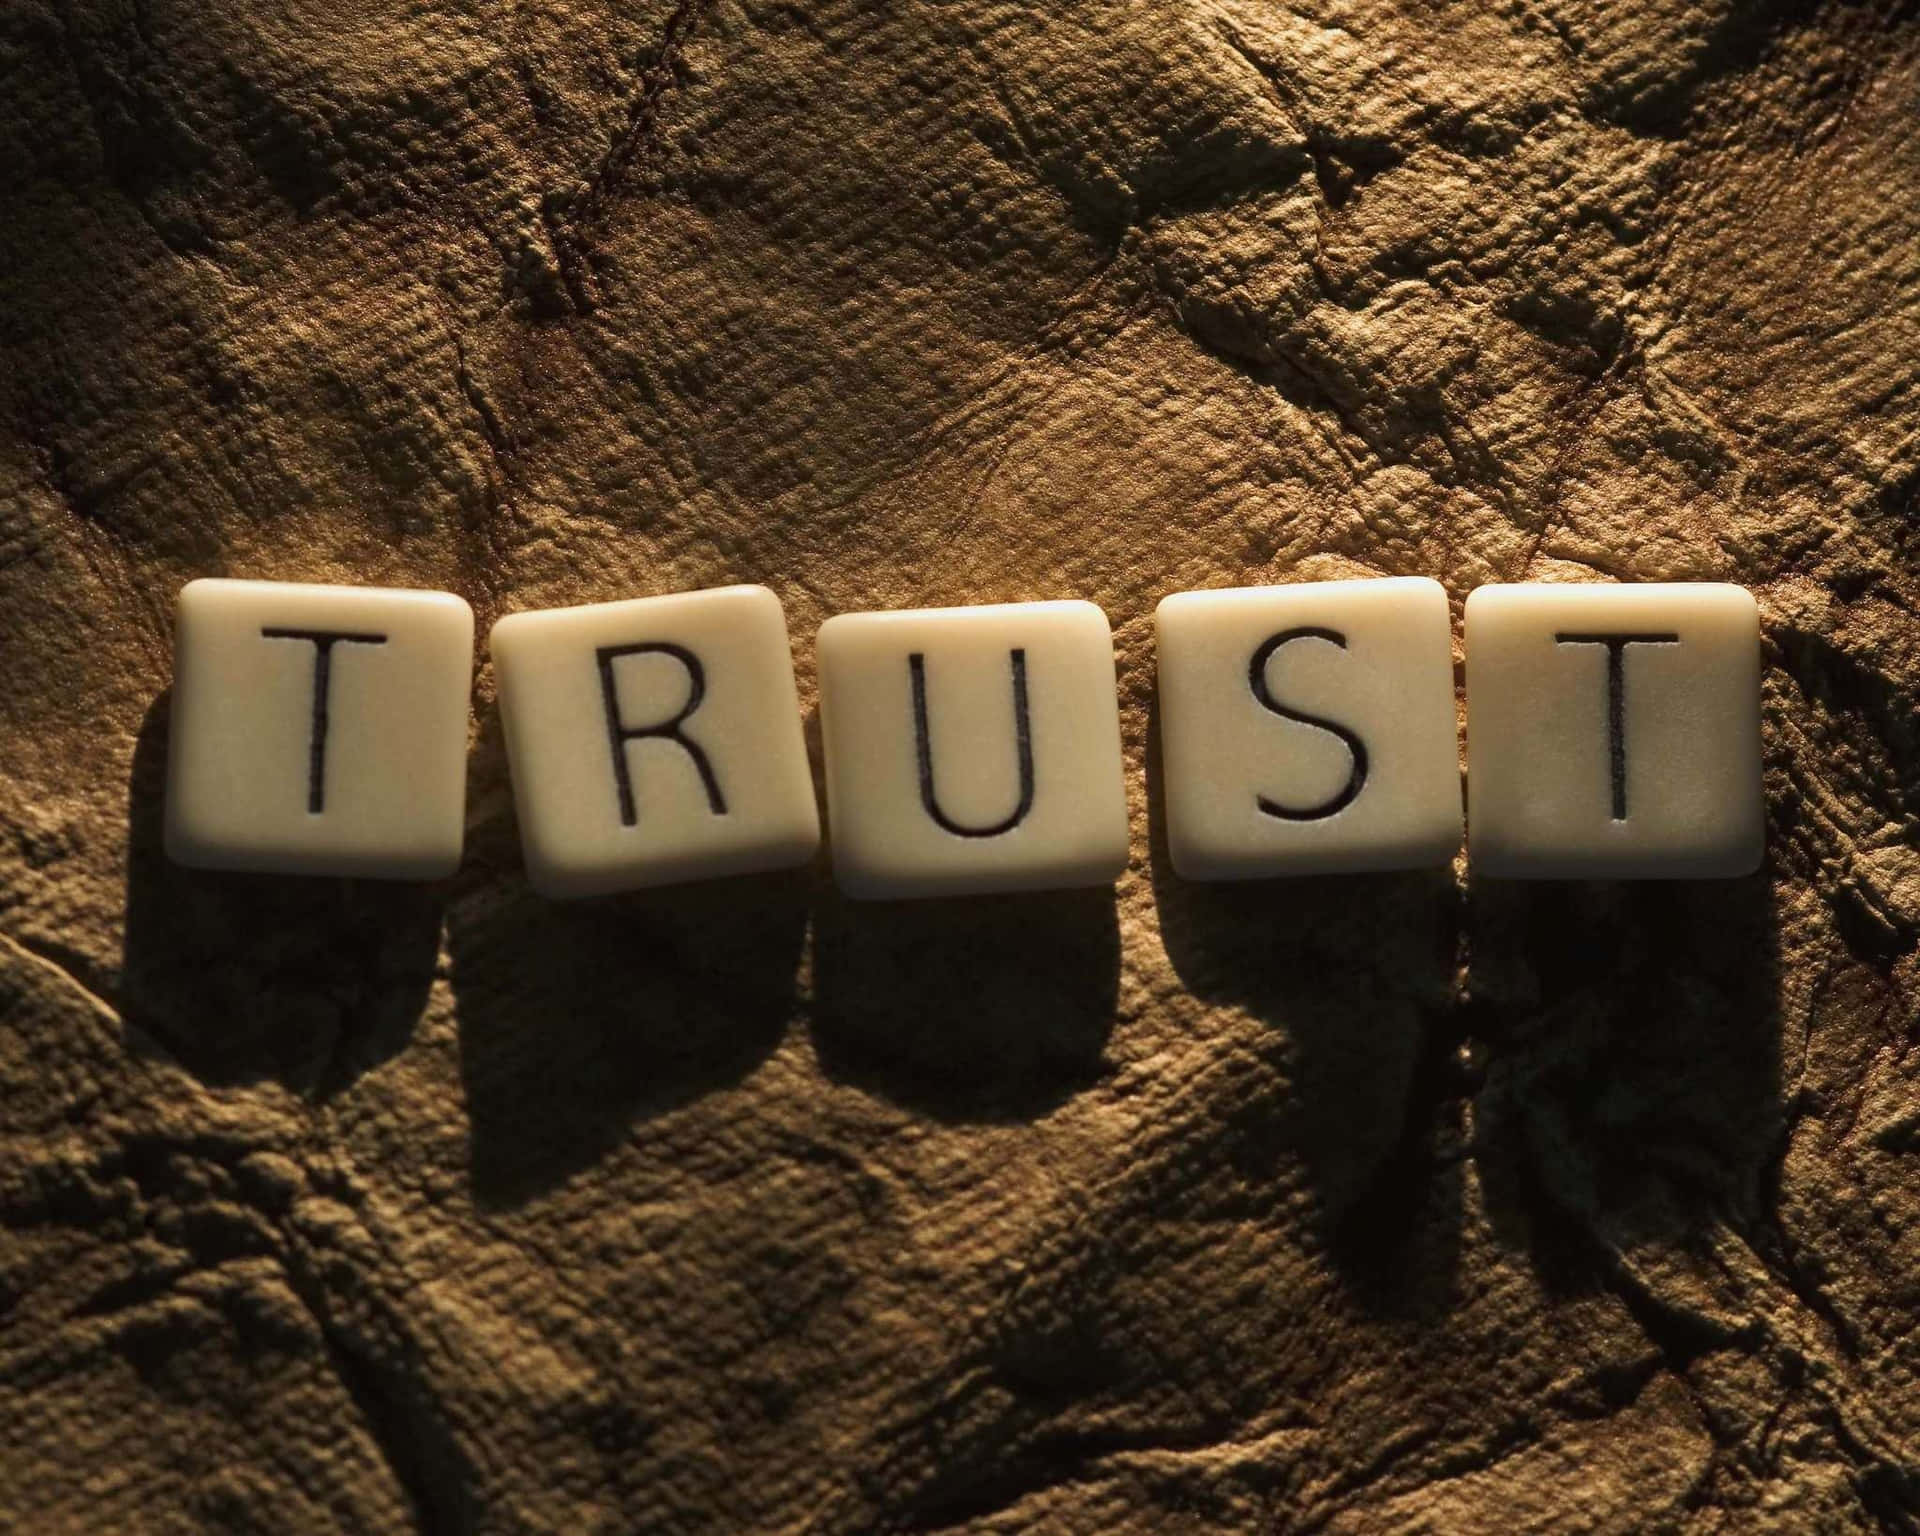 Build trust through reliable and consistent interactions